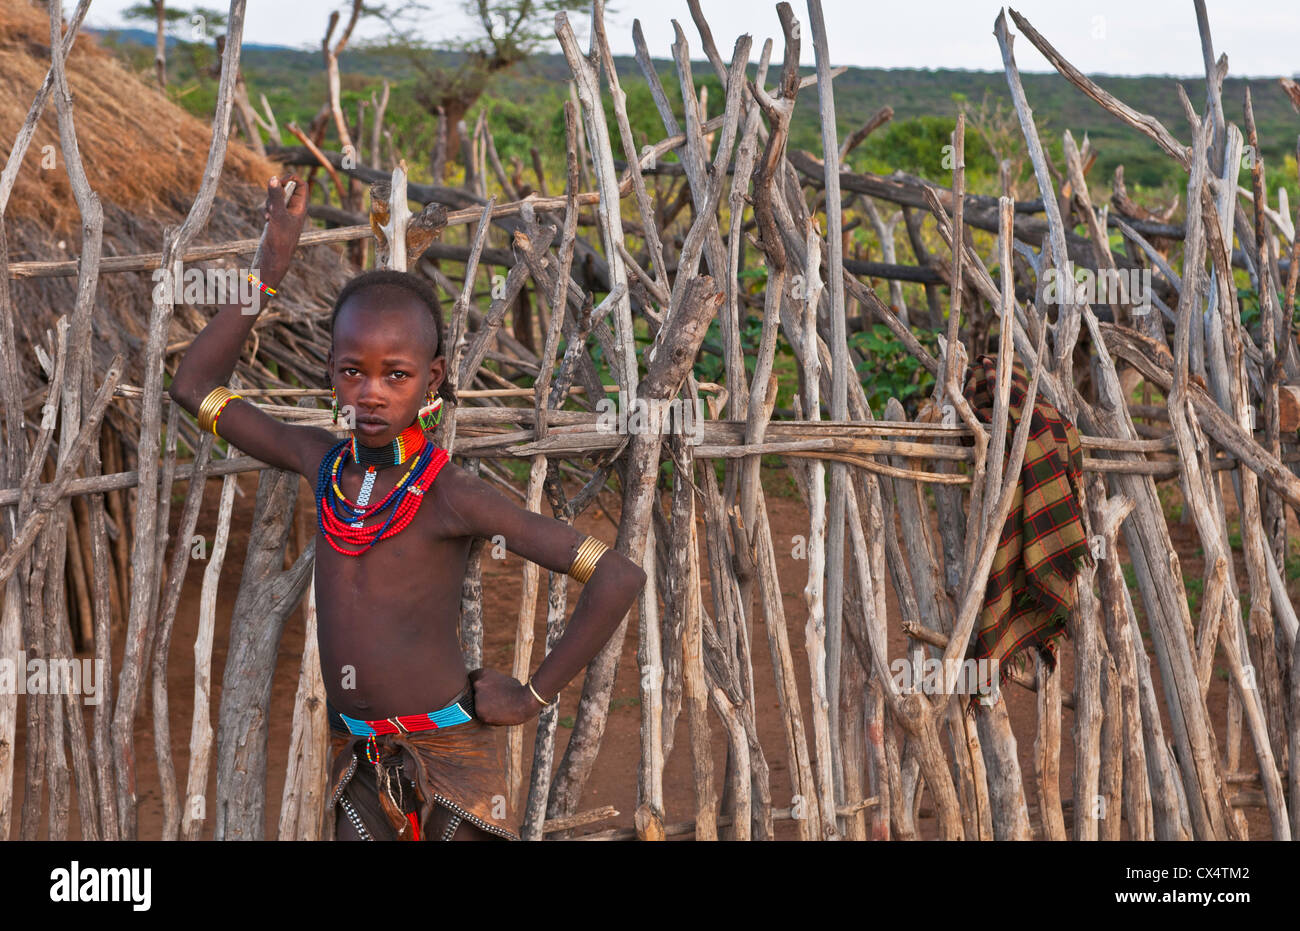 Turmi Ethiopia Africa village Lower Omo Valley Hamar Hammer tribe young  girl in village at fence Stock Photo - Alamy